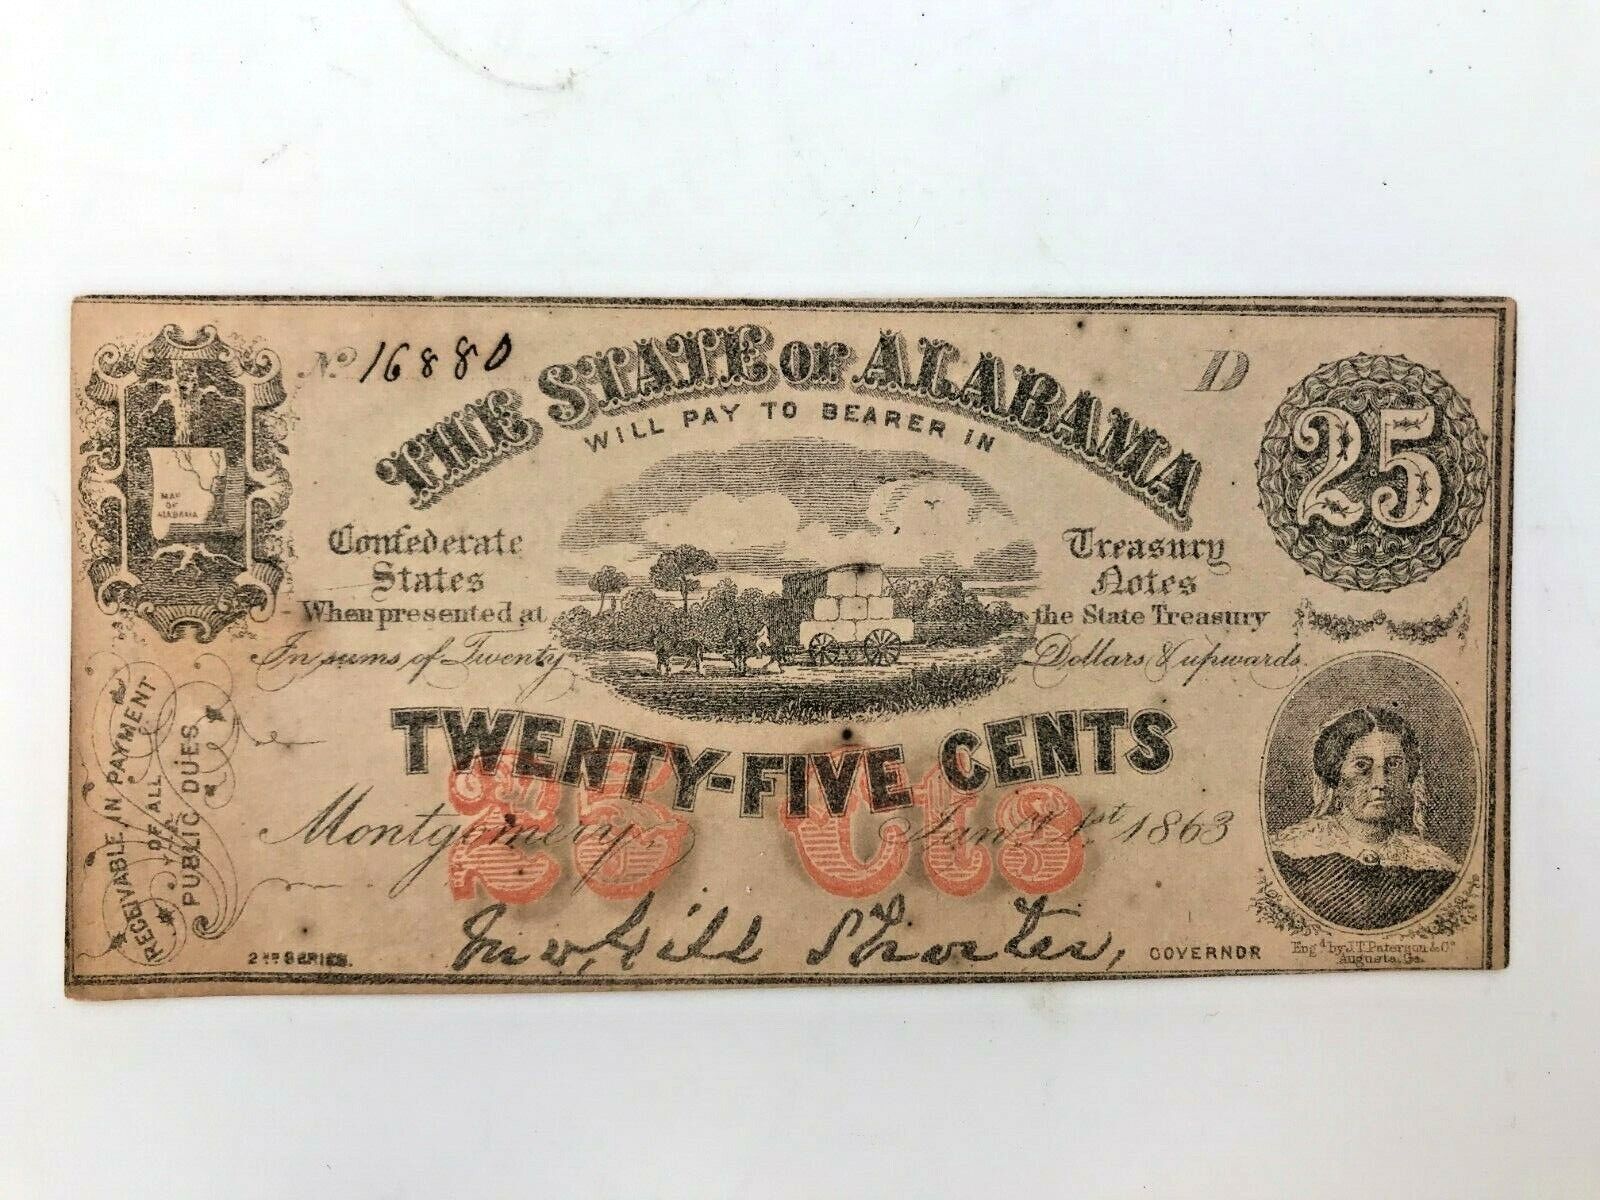 RARE CONFED. CURRENCY - ALABAMA - TWENTY-FIVE CENTS NOTE - RARE CURRENCY - AL75